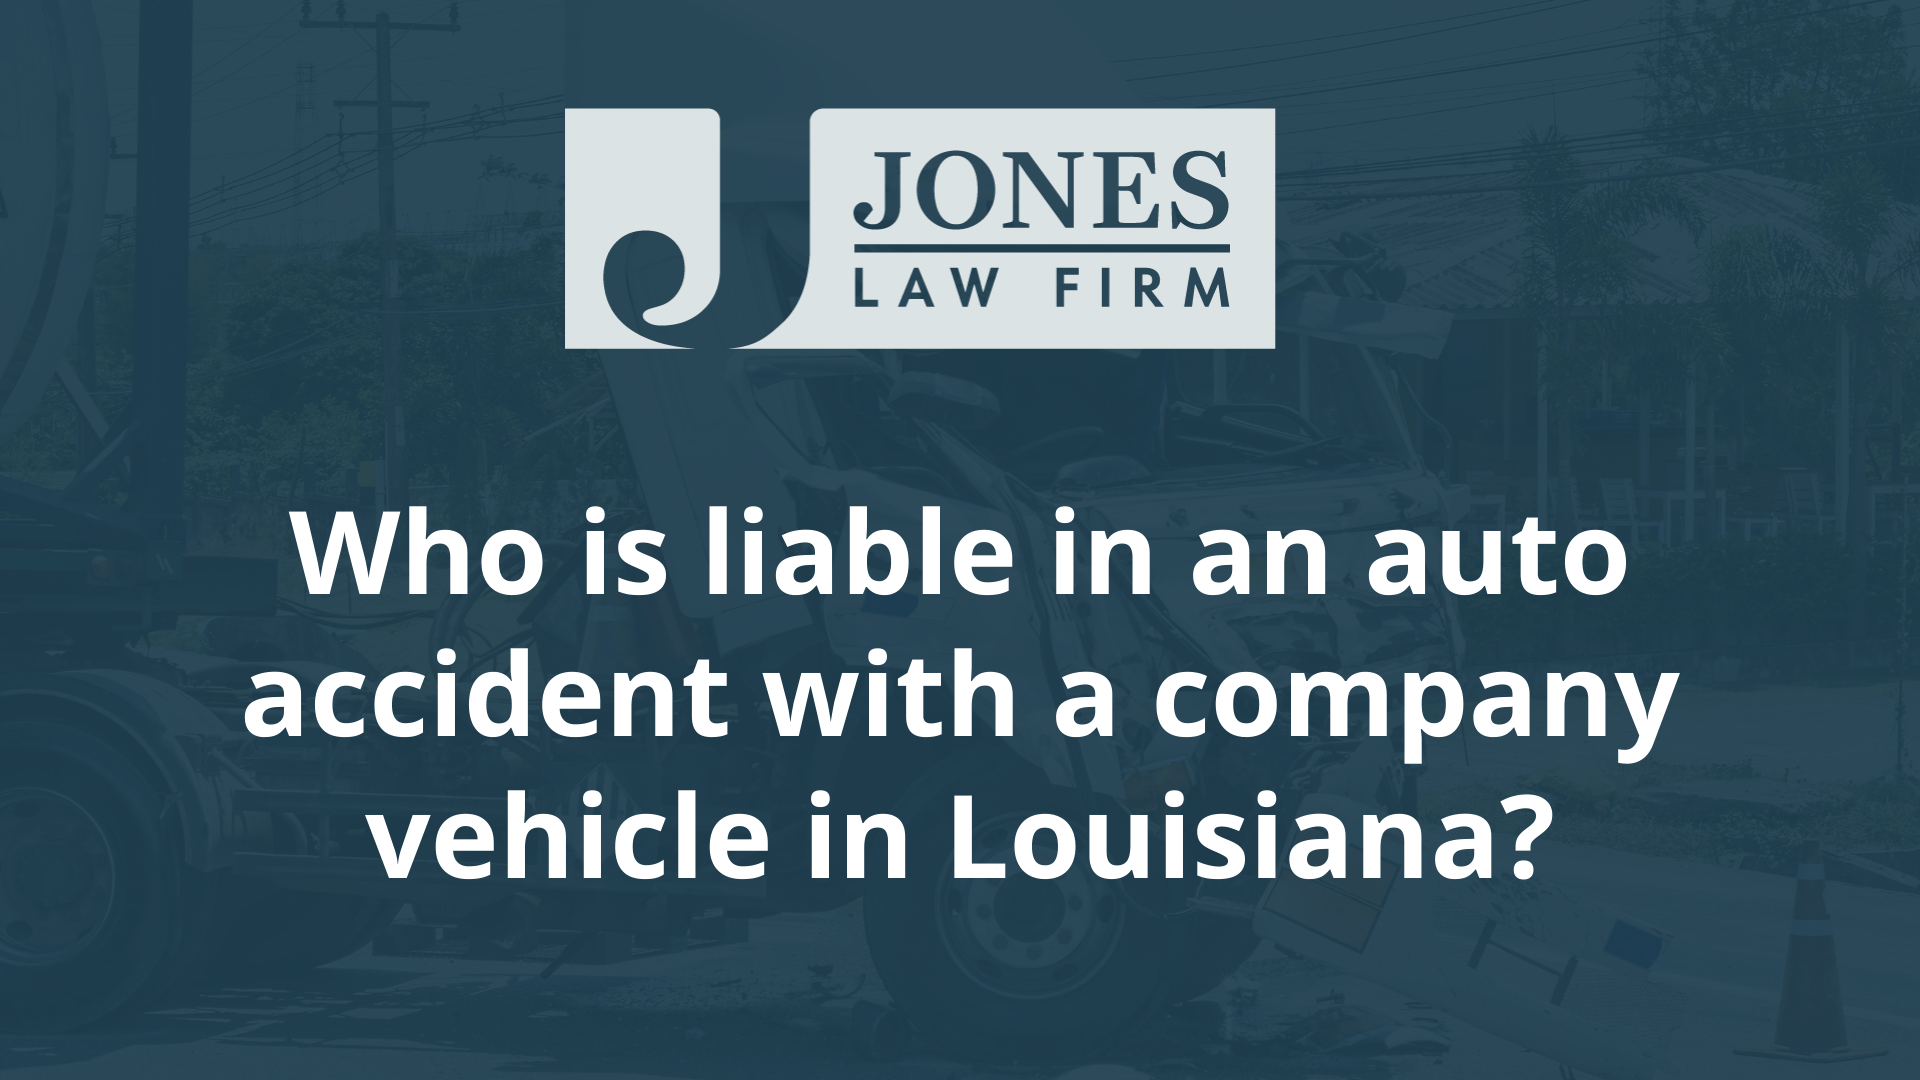 Who is liable in an auto accident with a company vehicle - jones law firm - louisiana